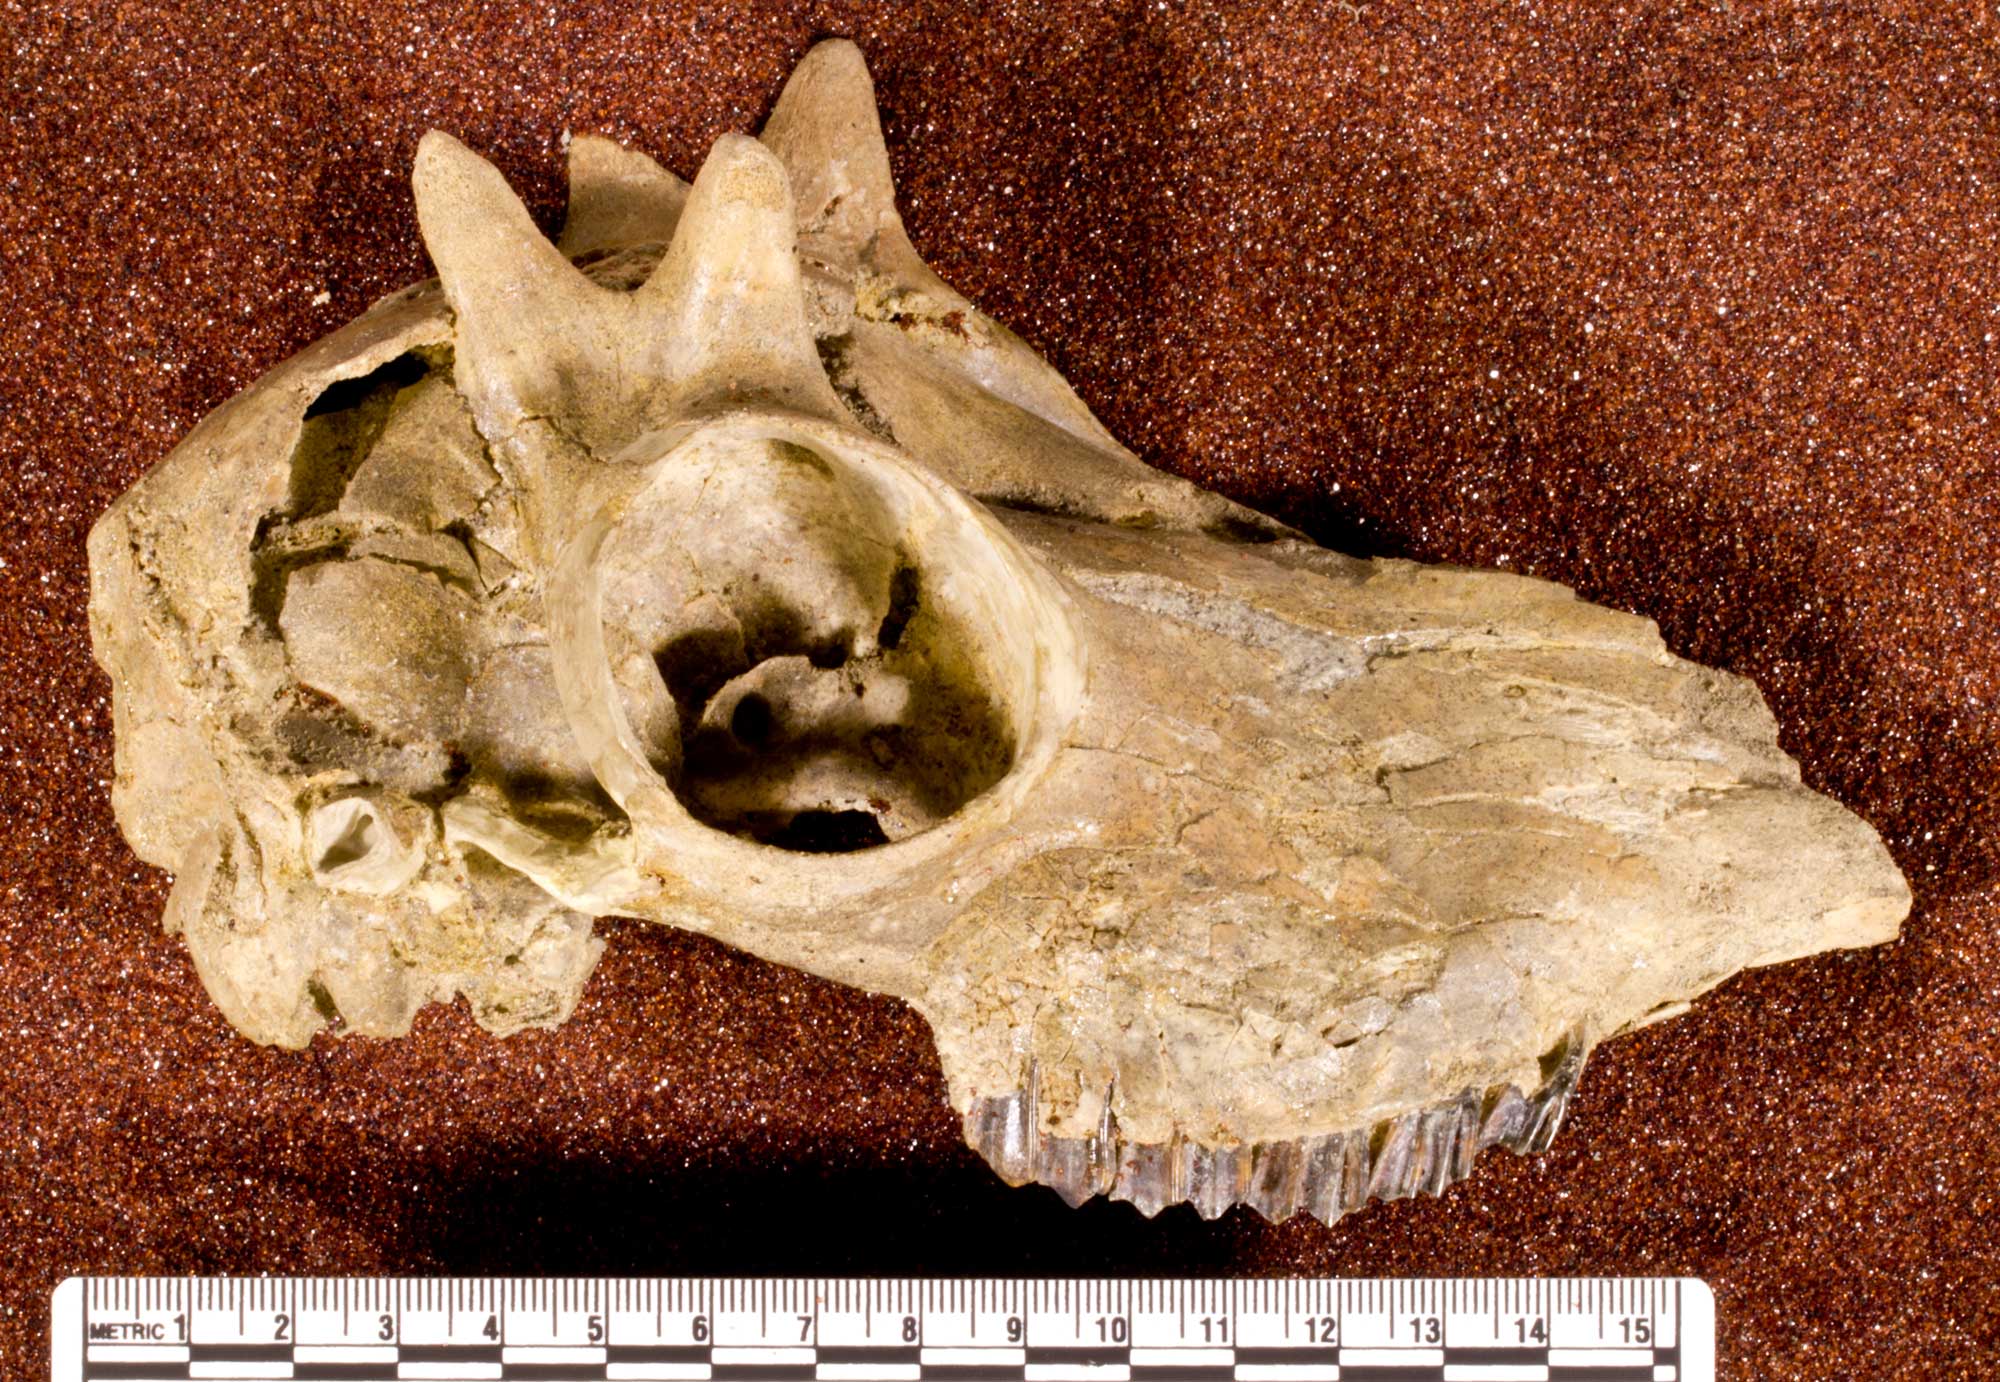 Photograph of the skull of a dwarf pronghorn antelope from the Pliocene Hagerman Lake Beds, Idaho. The photo shows a skull missing the lower jaw, with the nose facing right. The skull has a large eye socket with a short, bifurcated horn above it. Total skull length is just over 15 centimeters.